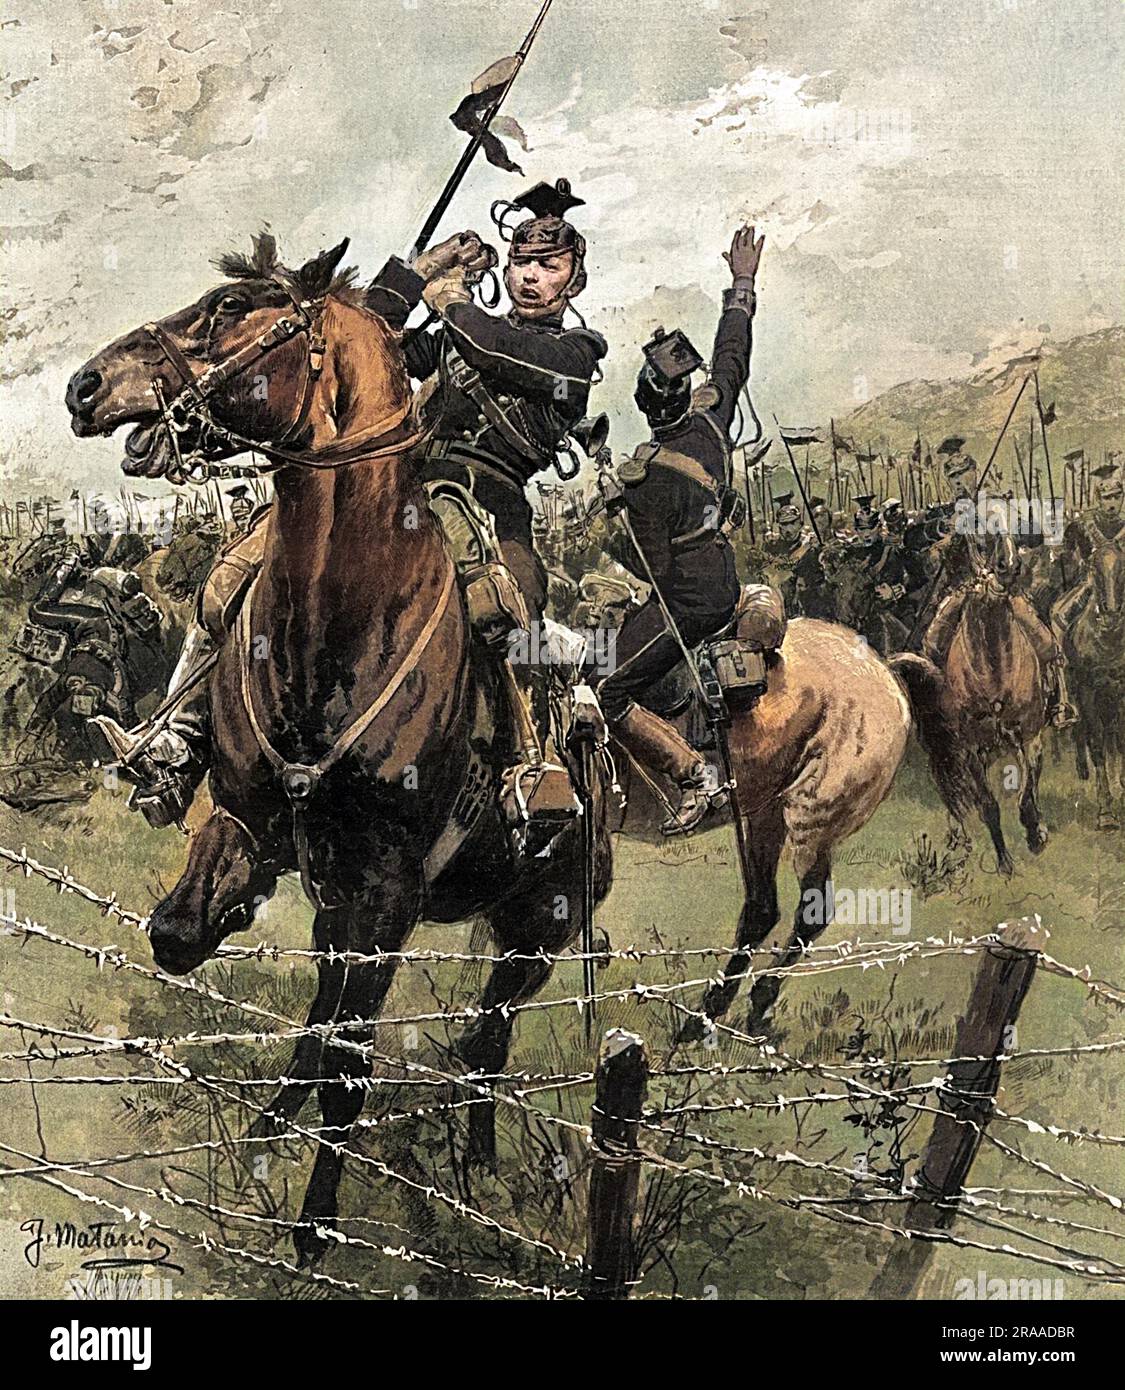 A detachment of German Uhlans charging a fort at Liege, Belgium, only to encounter the barbed wire defences constructed by order of General Liman, commander of the Belgian troops in Liege.     Date: 06-Aug-14 Stock Photo